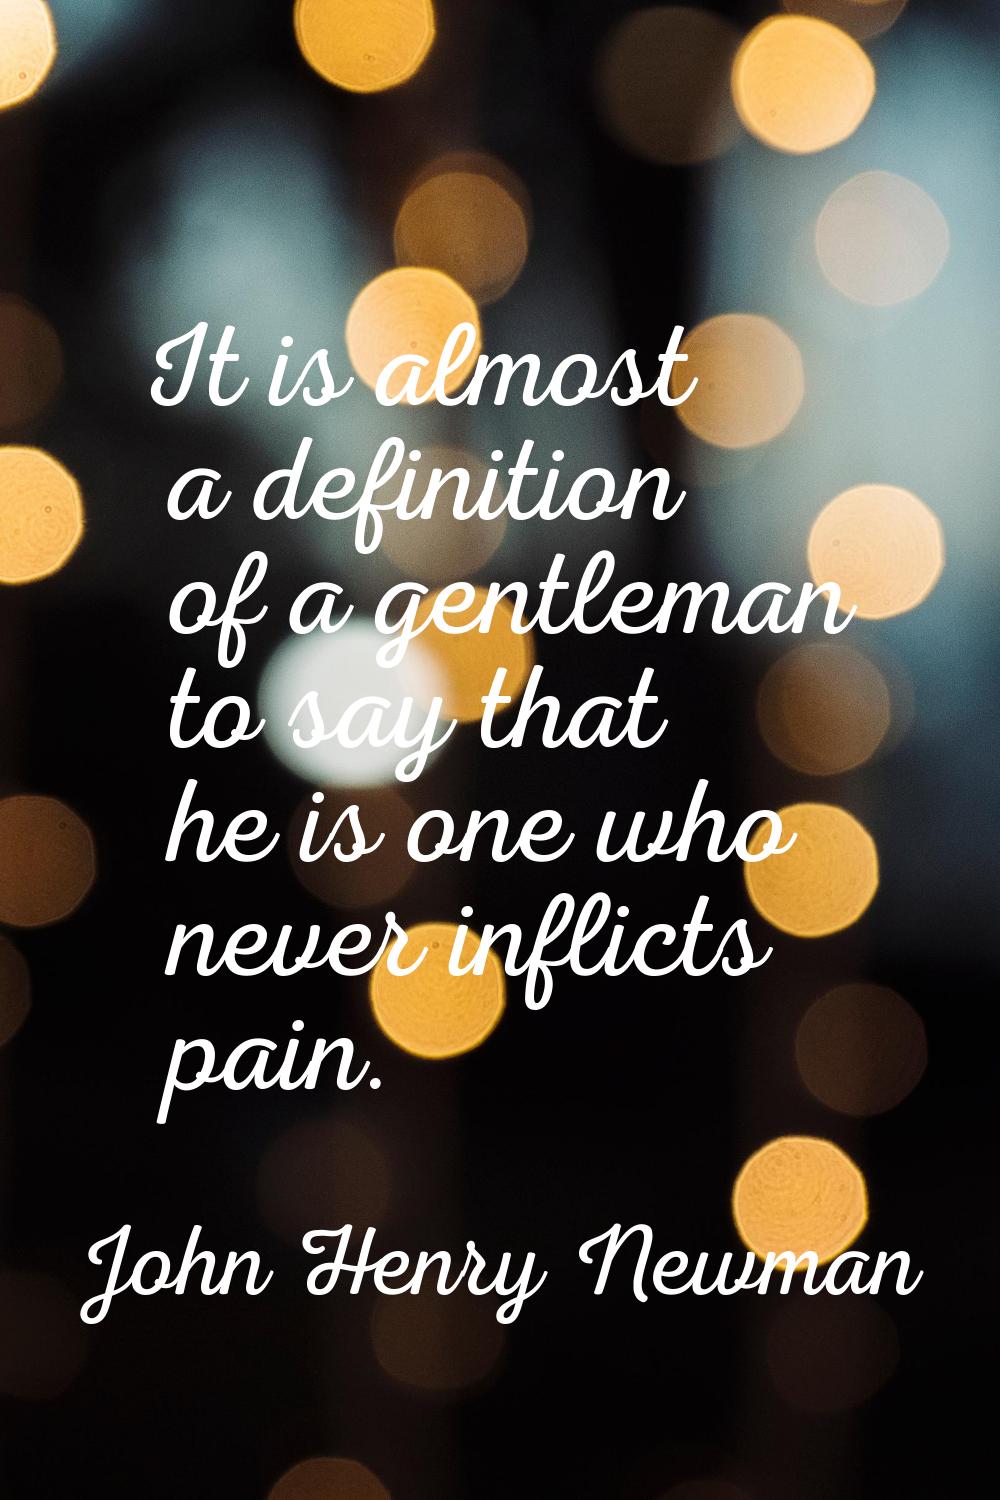 It is almost a definition of a gentleman to say that he is one who never inflicts pain.